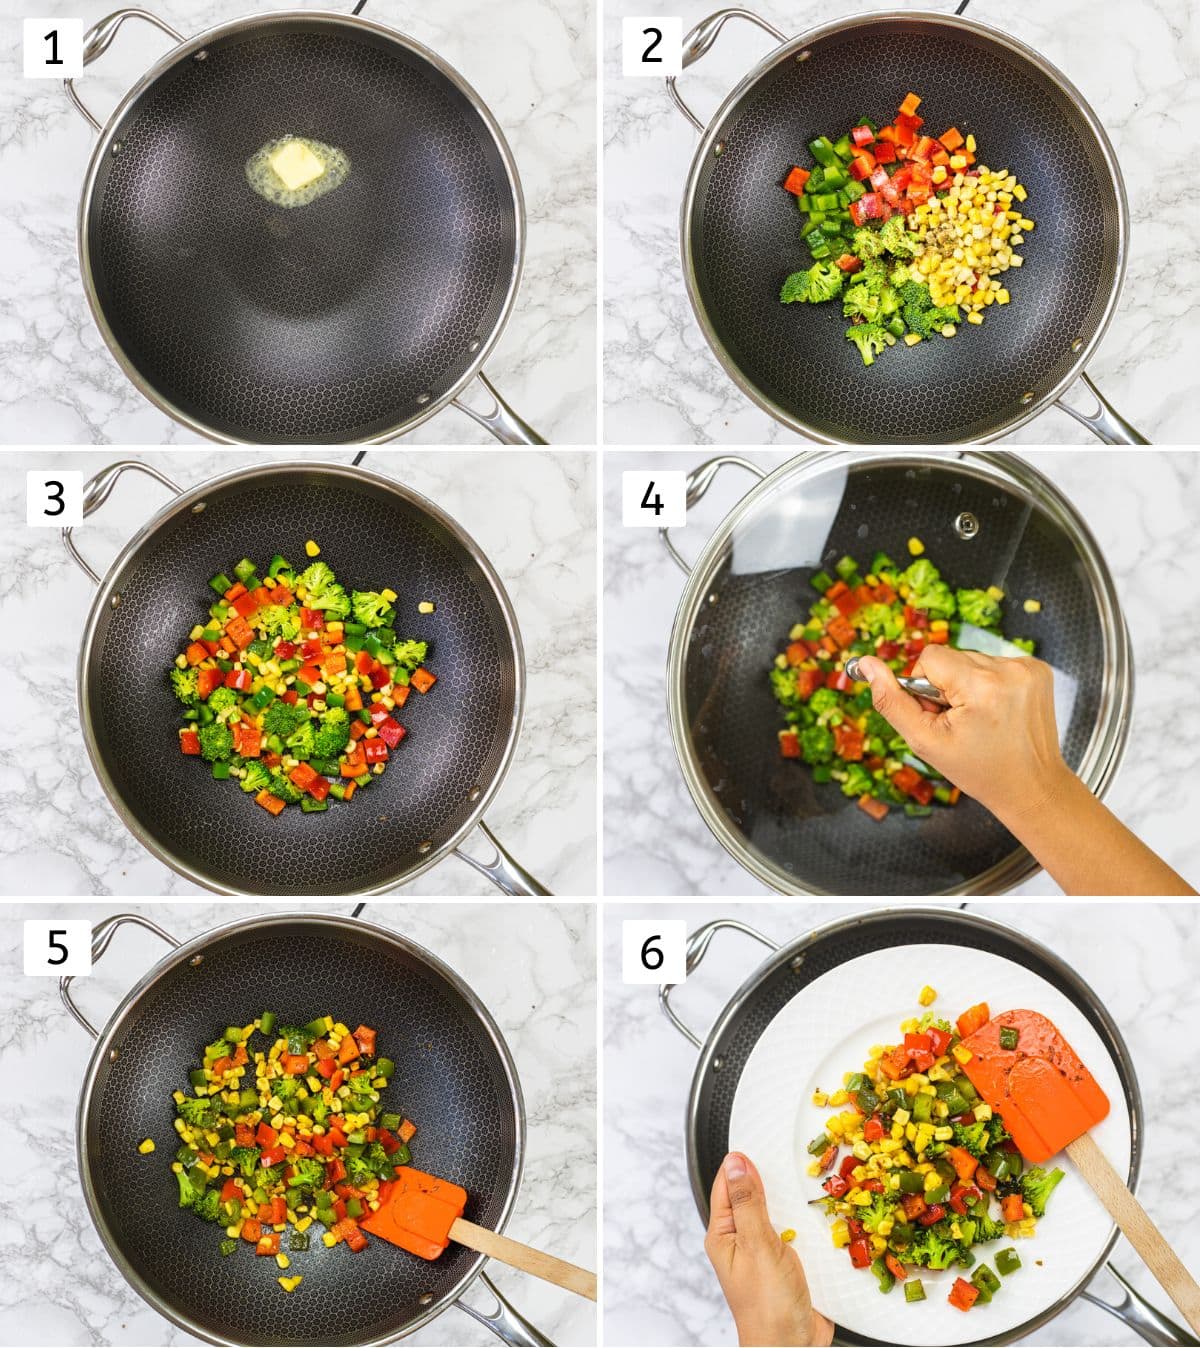 Collage of 6 images showing cooking veggies, covered in a pan.